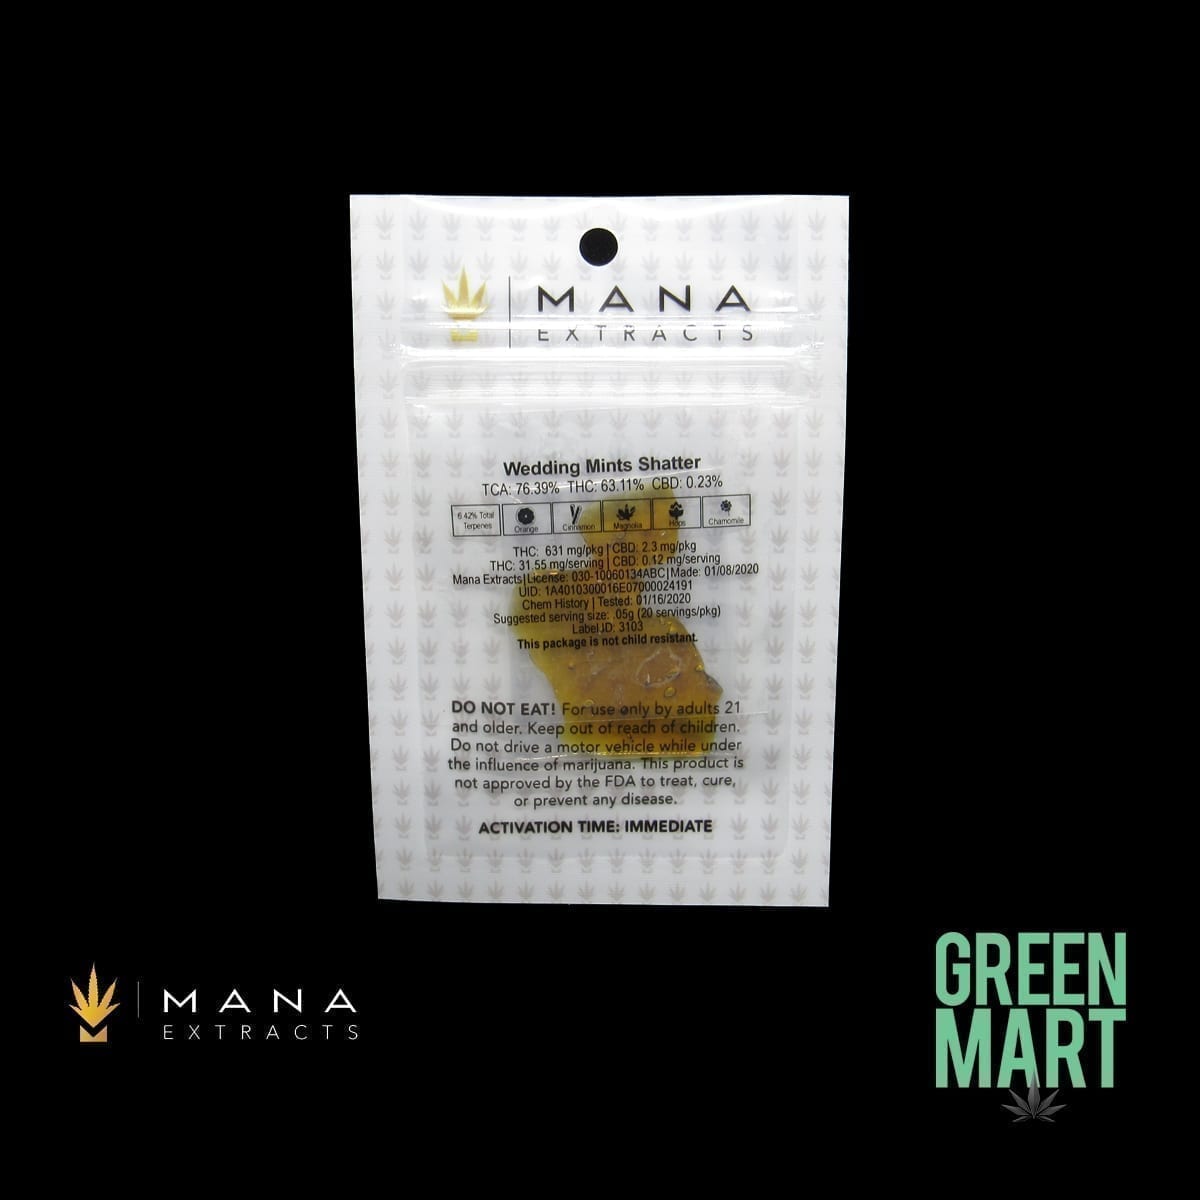 Wedding Mints Shatter by Mana Extracts